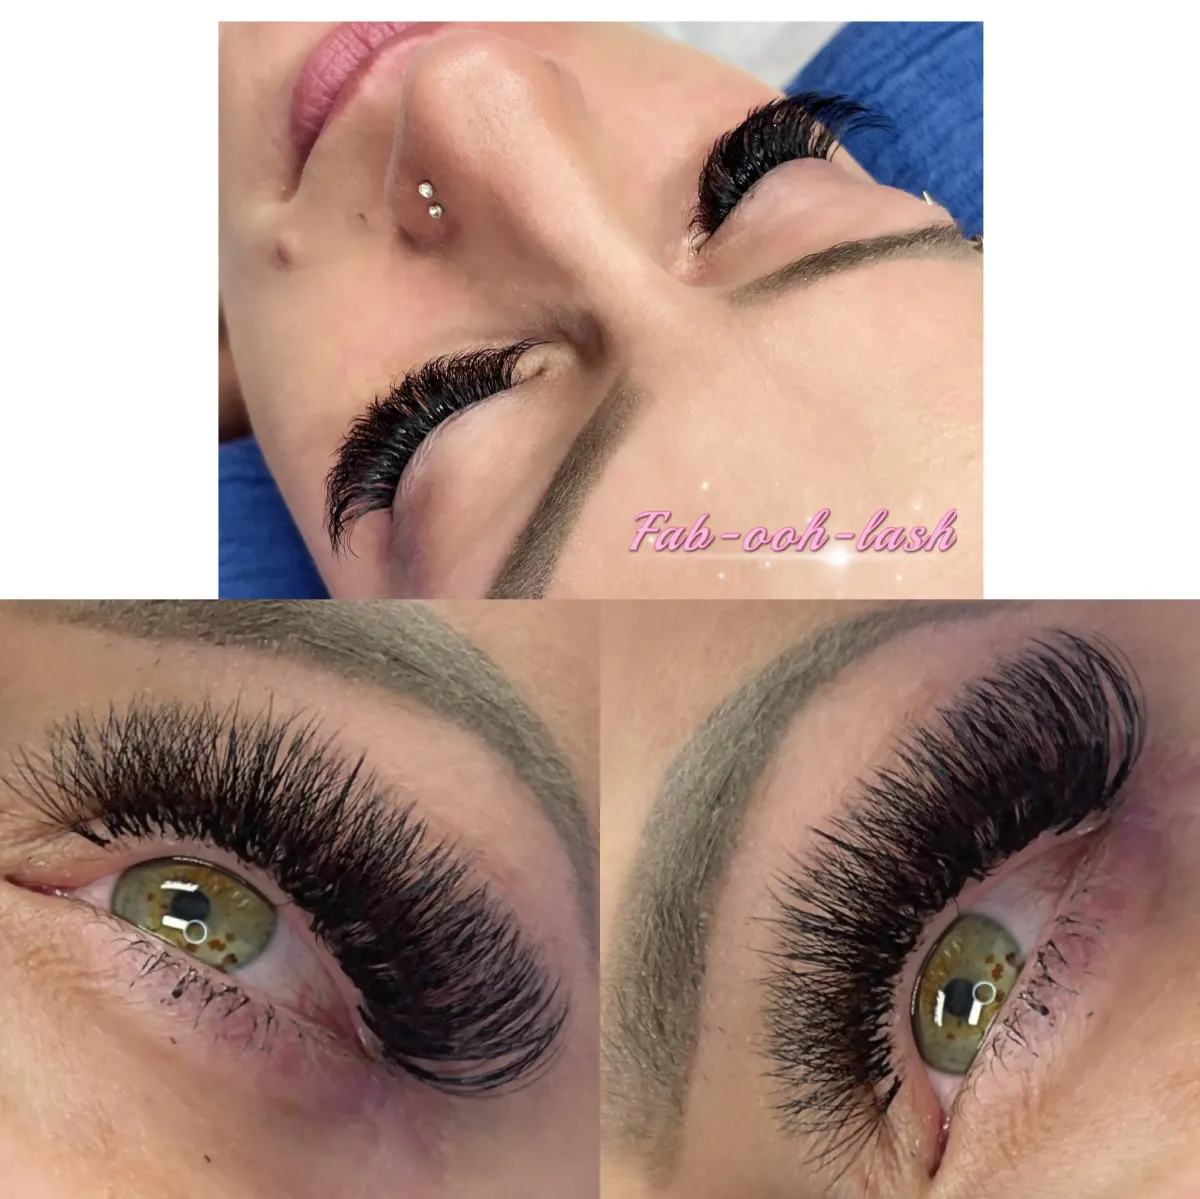 Experience the Beauty of Fab-ooh-lash Eyelash Extensions – Classic, Hybrid, and Volume Lashes to Suit Your Style